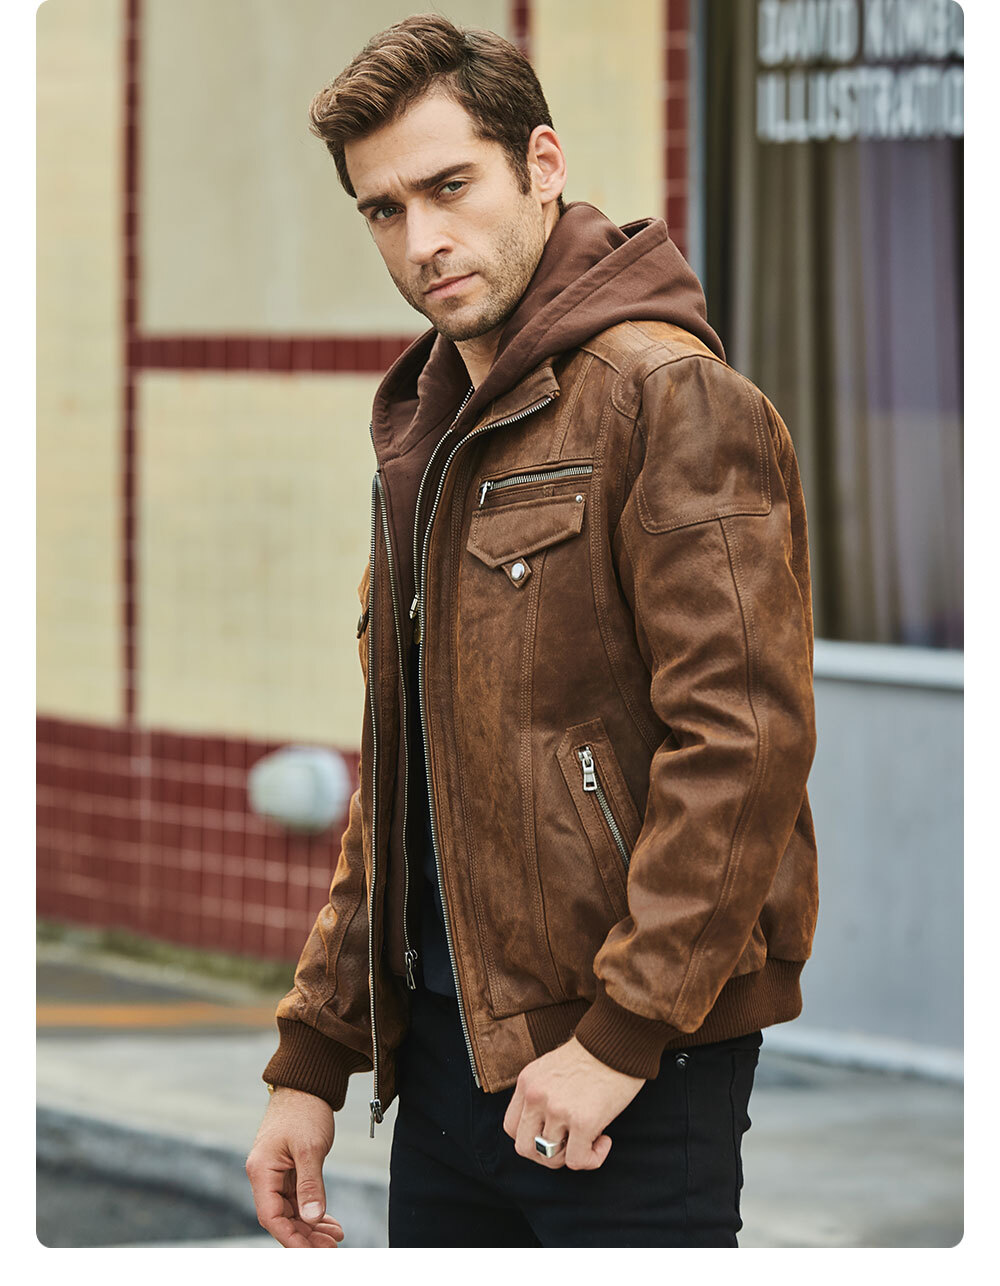 Men's Leather Removable Hooded Jacket Rib Trim MXGX282 Buy removable hooded leather moto jacket| leather removable hooded jacket brands